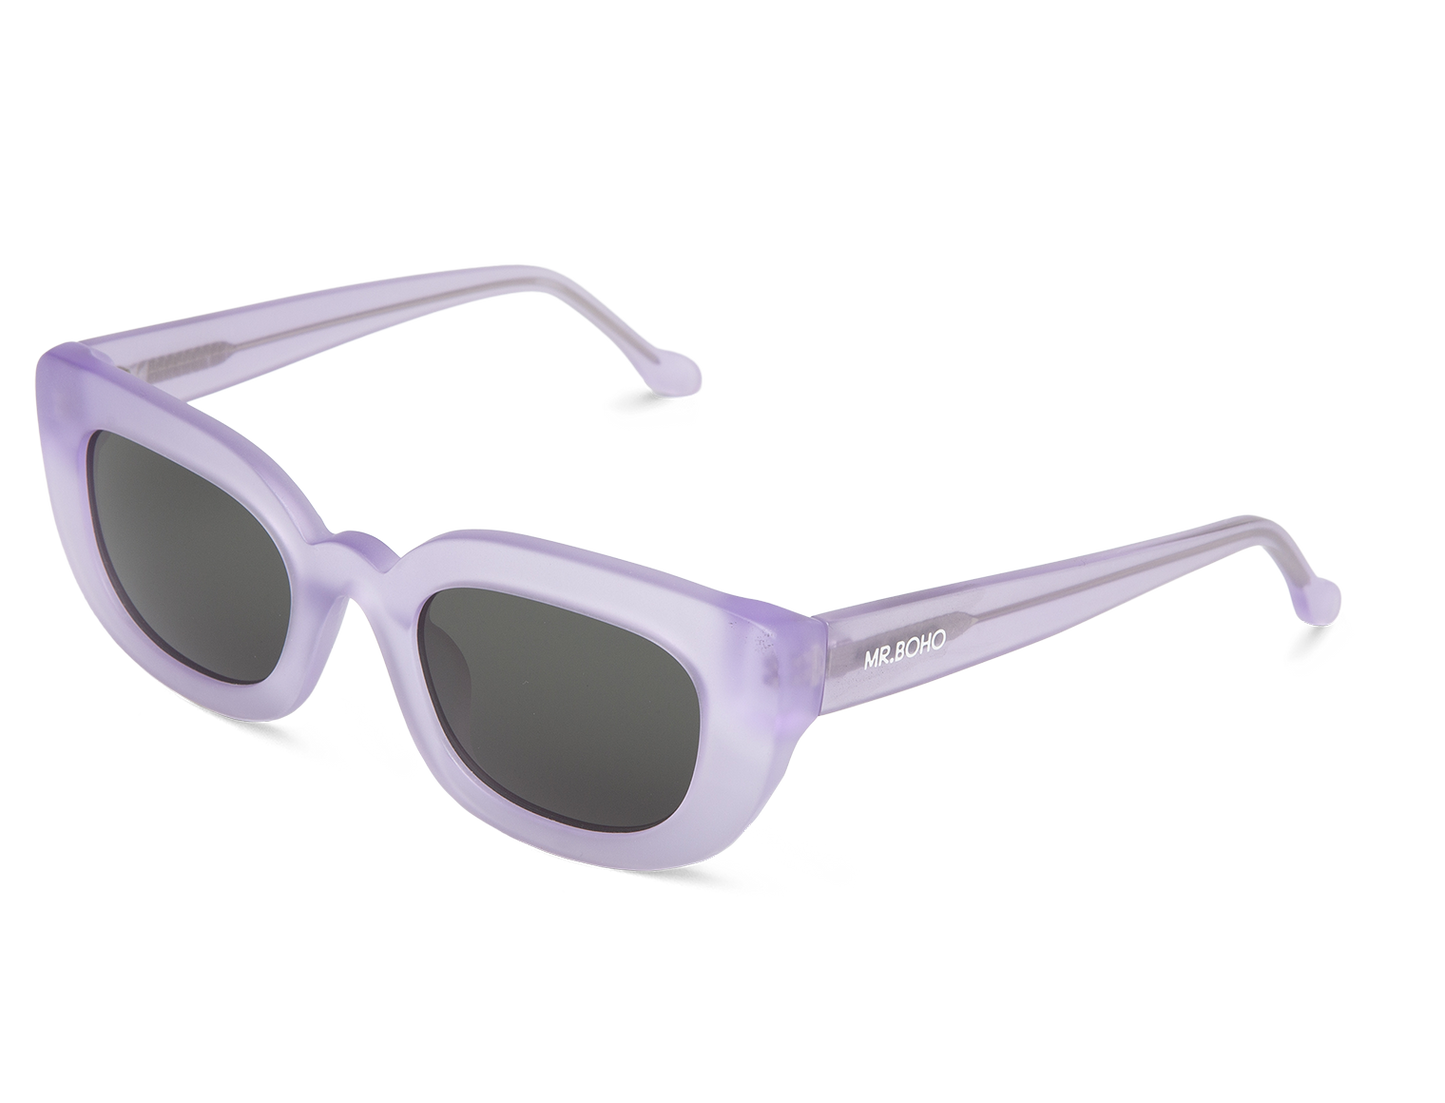 MATTE VIOLET - SHUMIKITA - WITH CLASSICAL LENSES